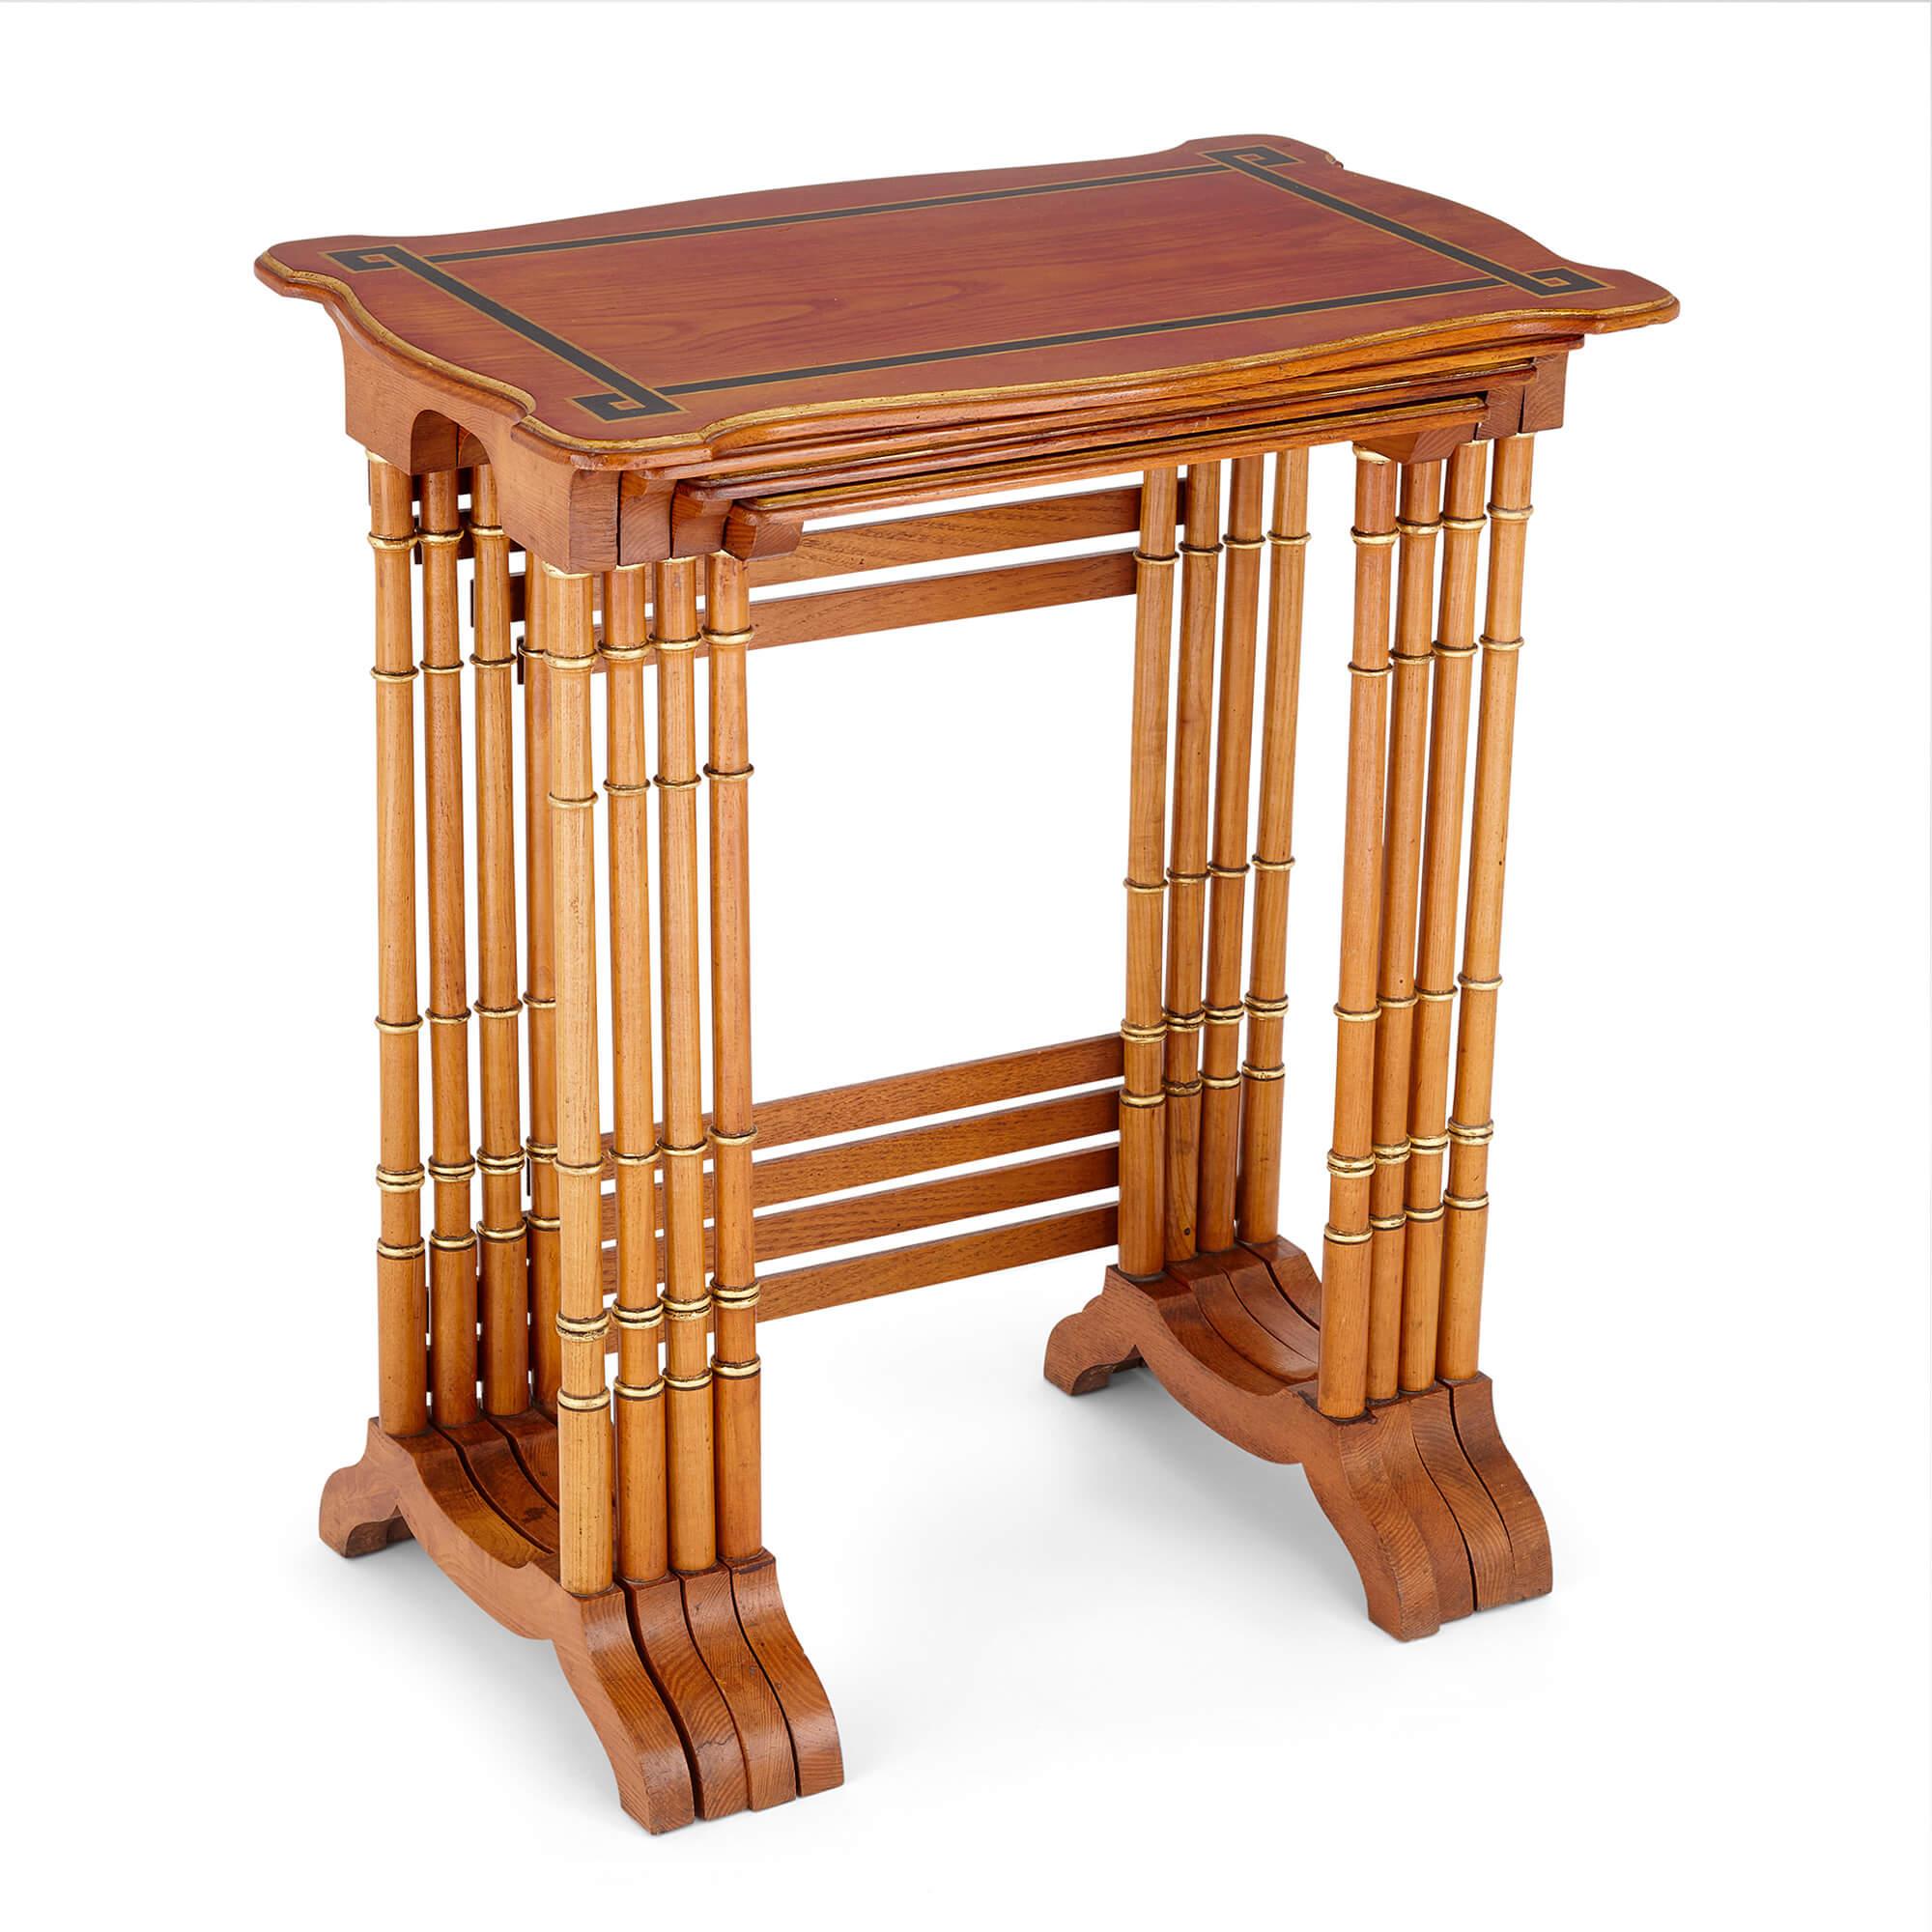 Set of four English nesting side tables with ebonised wooden inlay
English, circa 1920
Smallest: height 65cm, width 40cm, depth 34cm
Largest: height 70cm, width 60cm, depth 39cm

This very fine suite of nesting tables was made in England in the